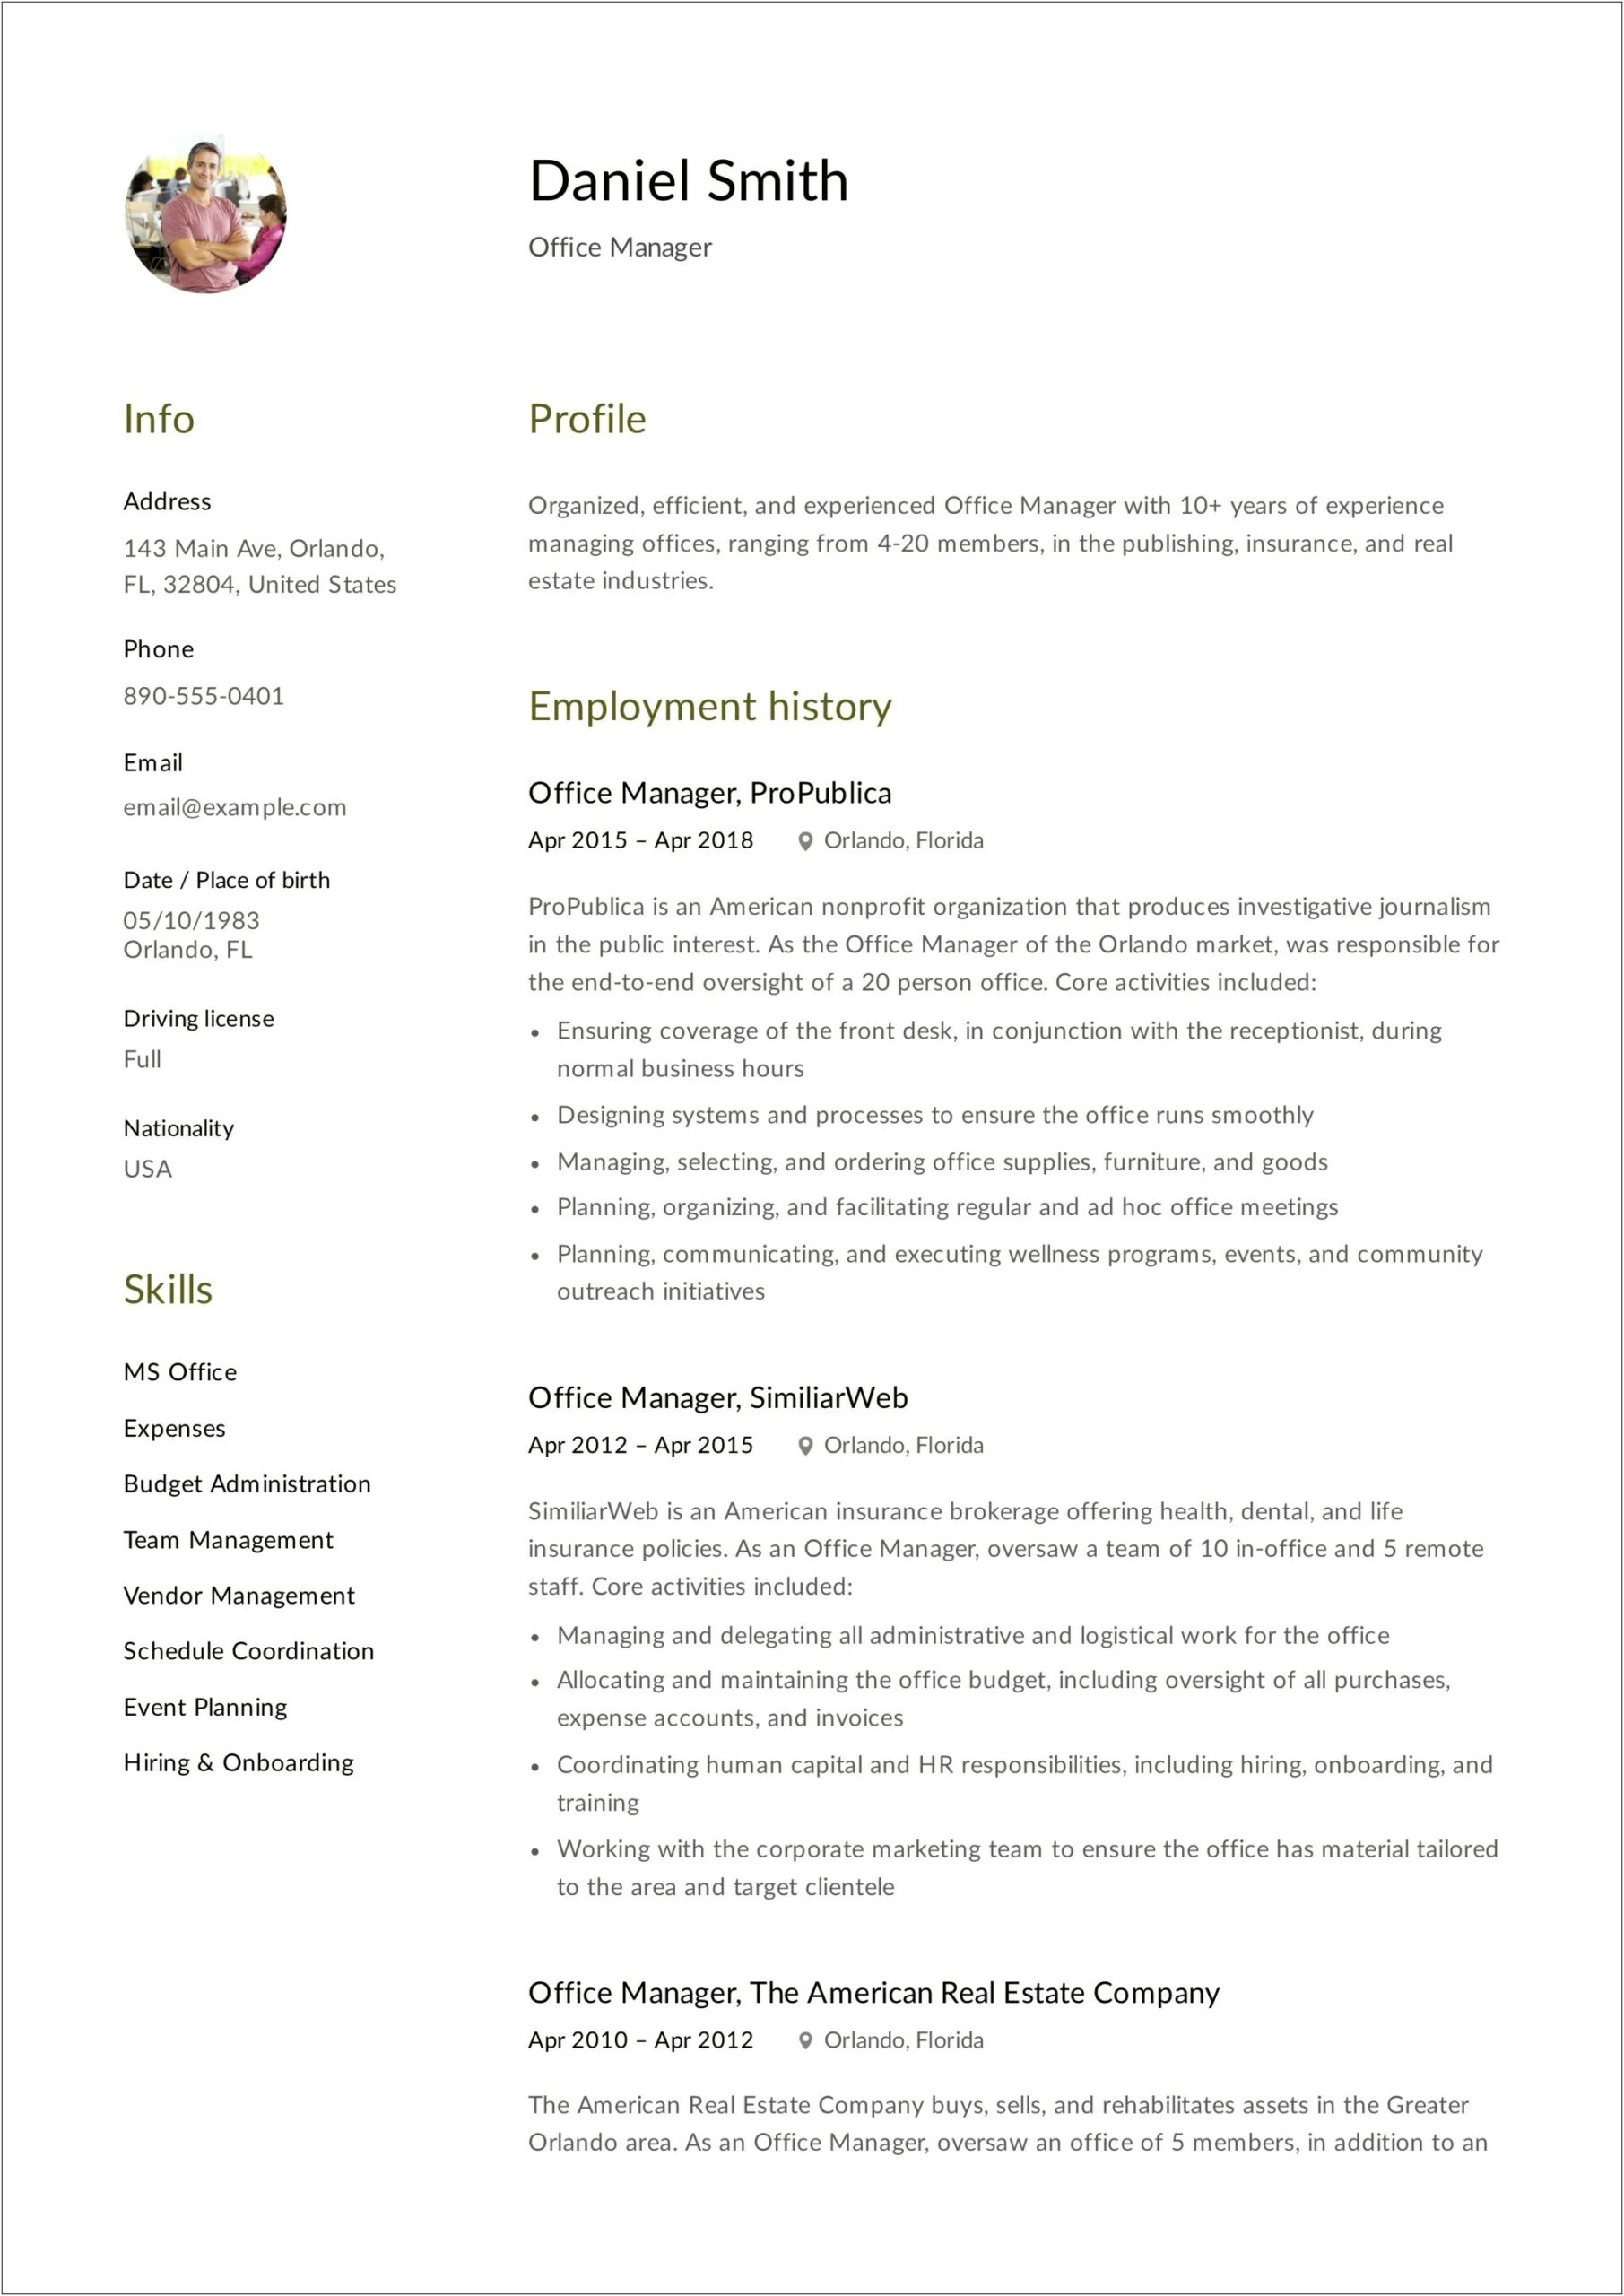 Resume Summary For Office Manager